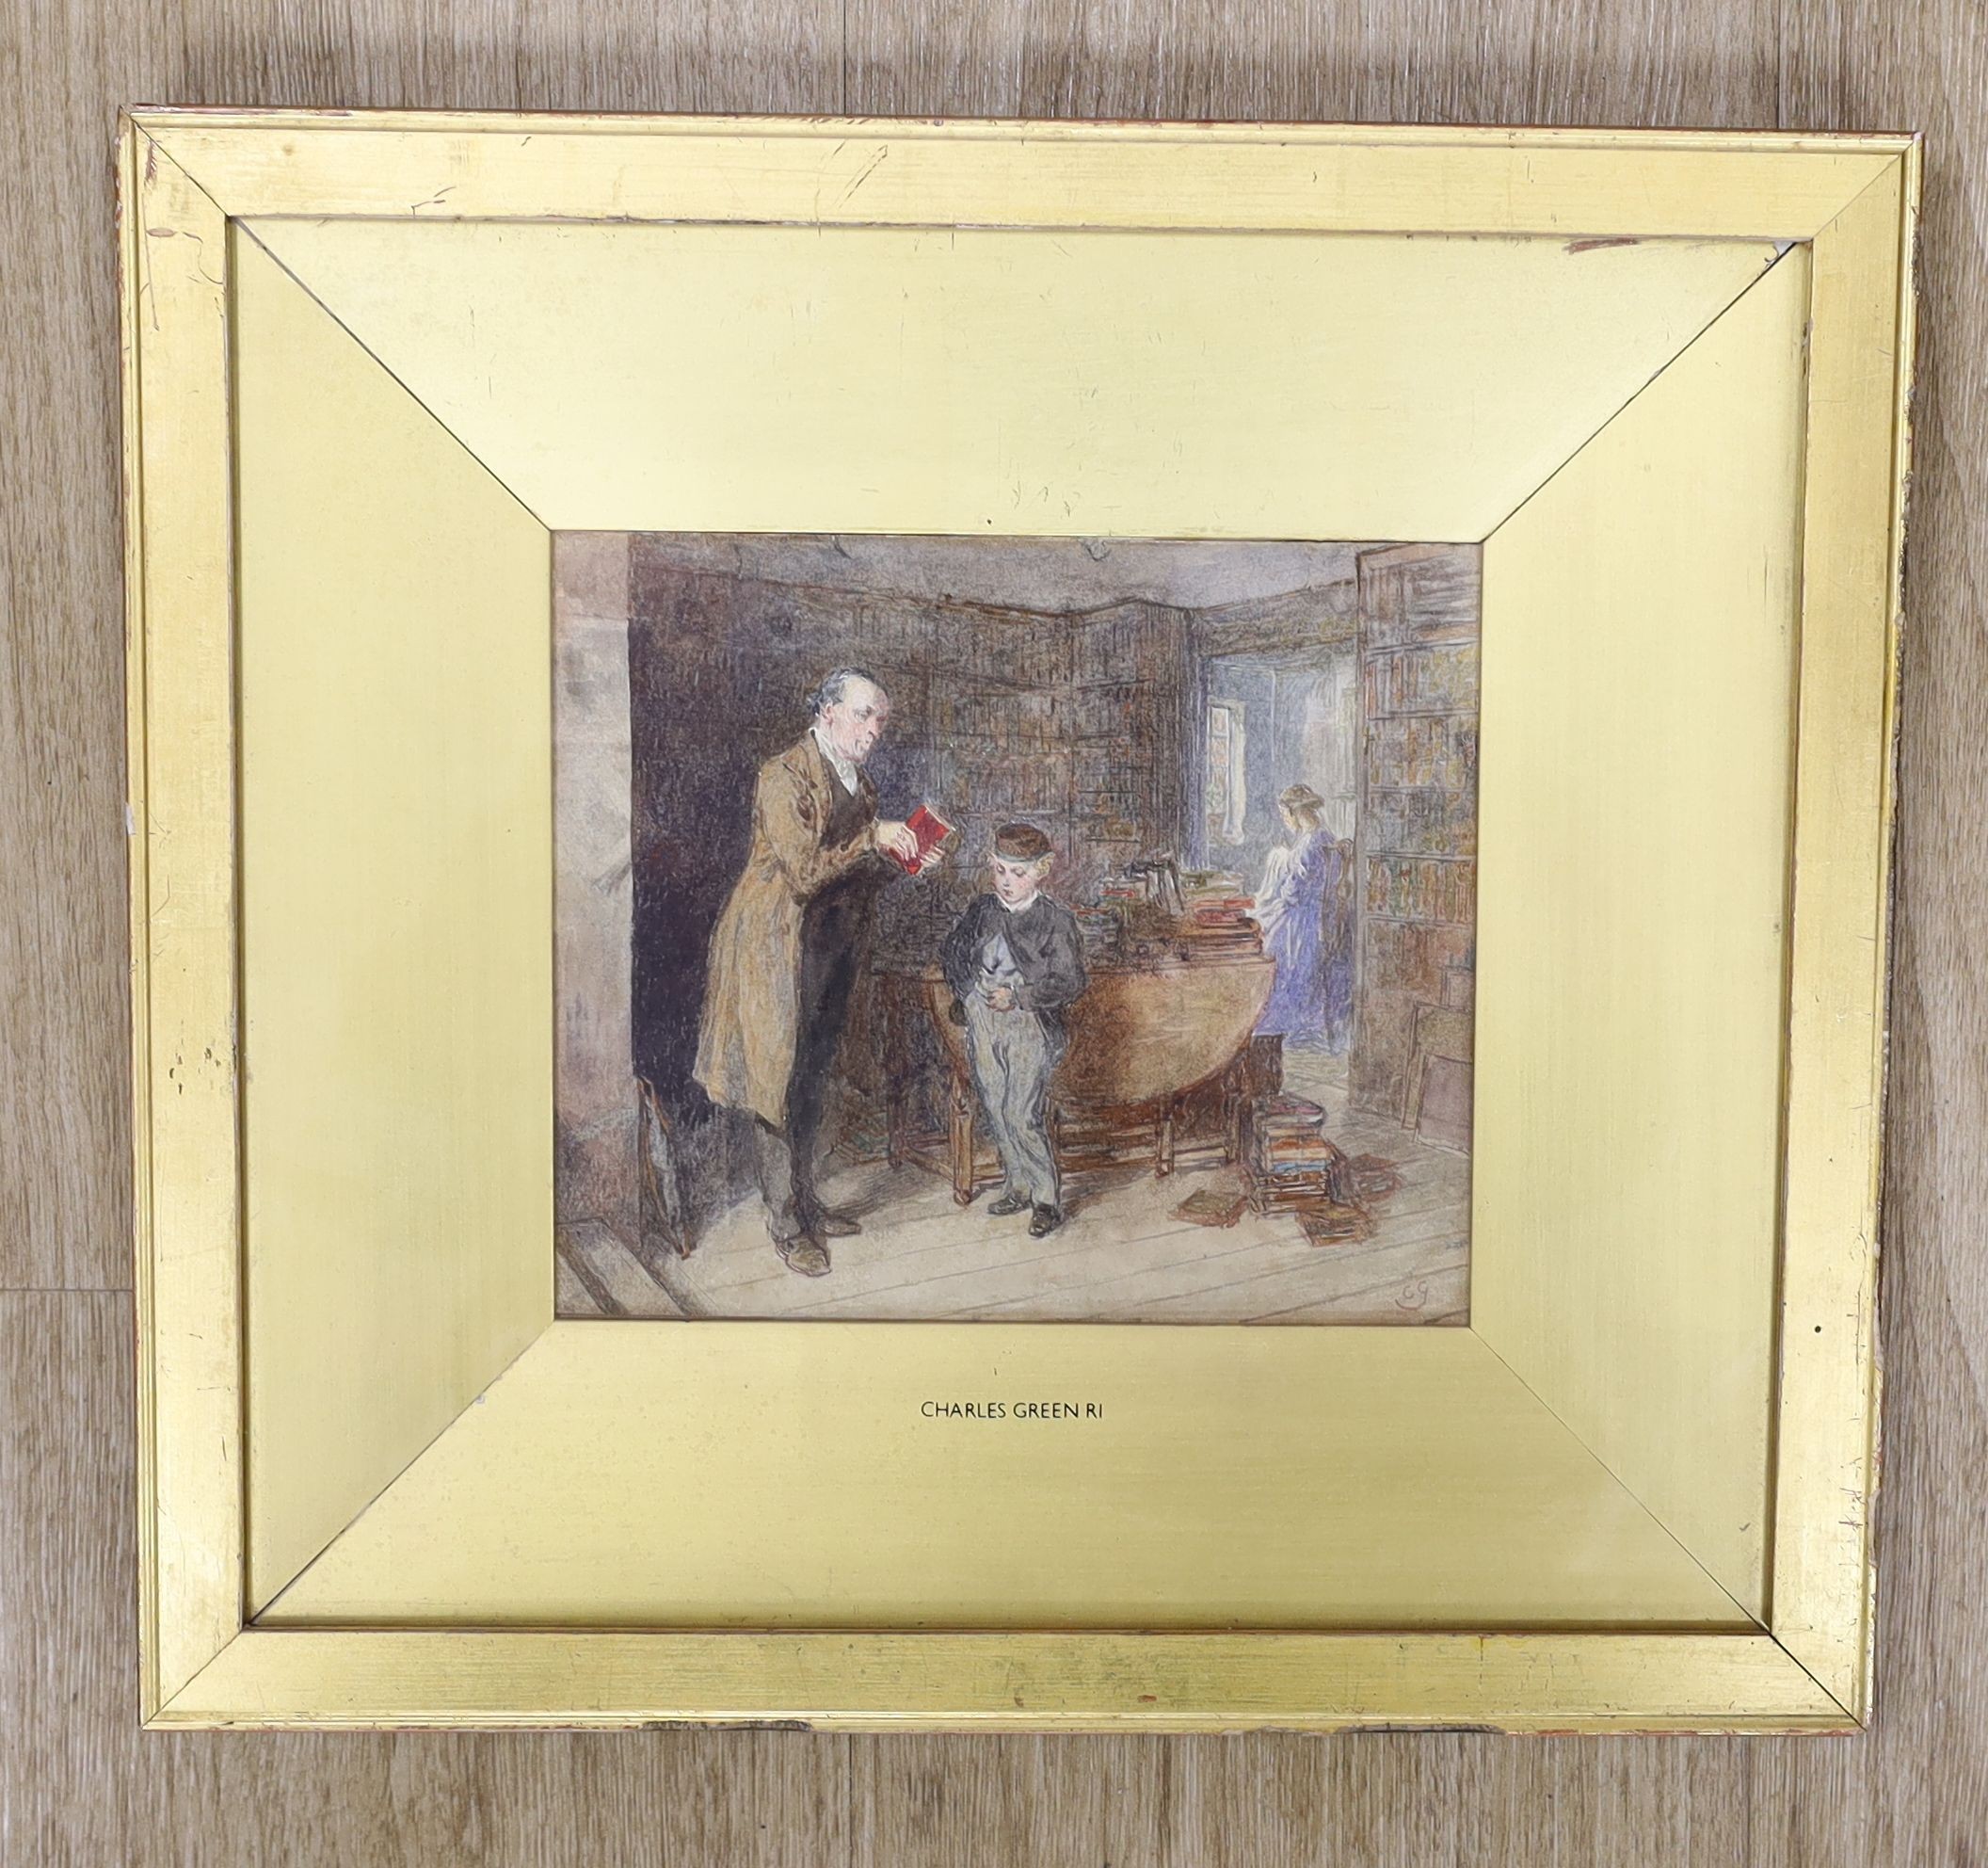 Charles Green R.I. (1840-1898) - watercolour, An Incident in the Life of J.J. Barratt, initialled, 15 x 17.5cm